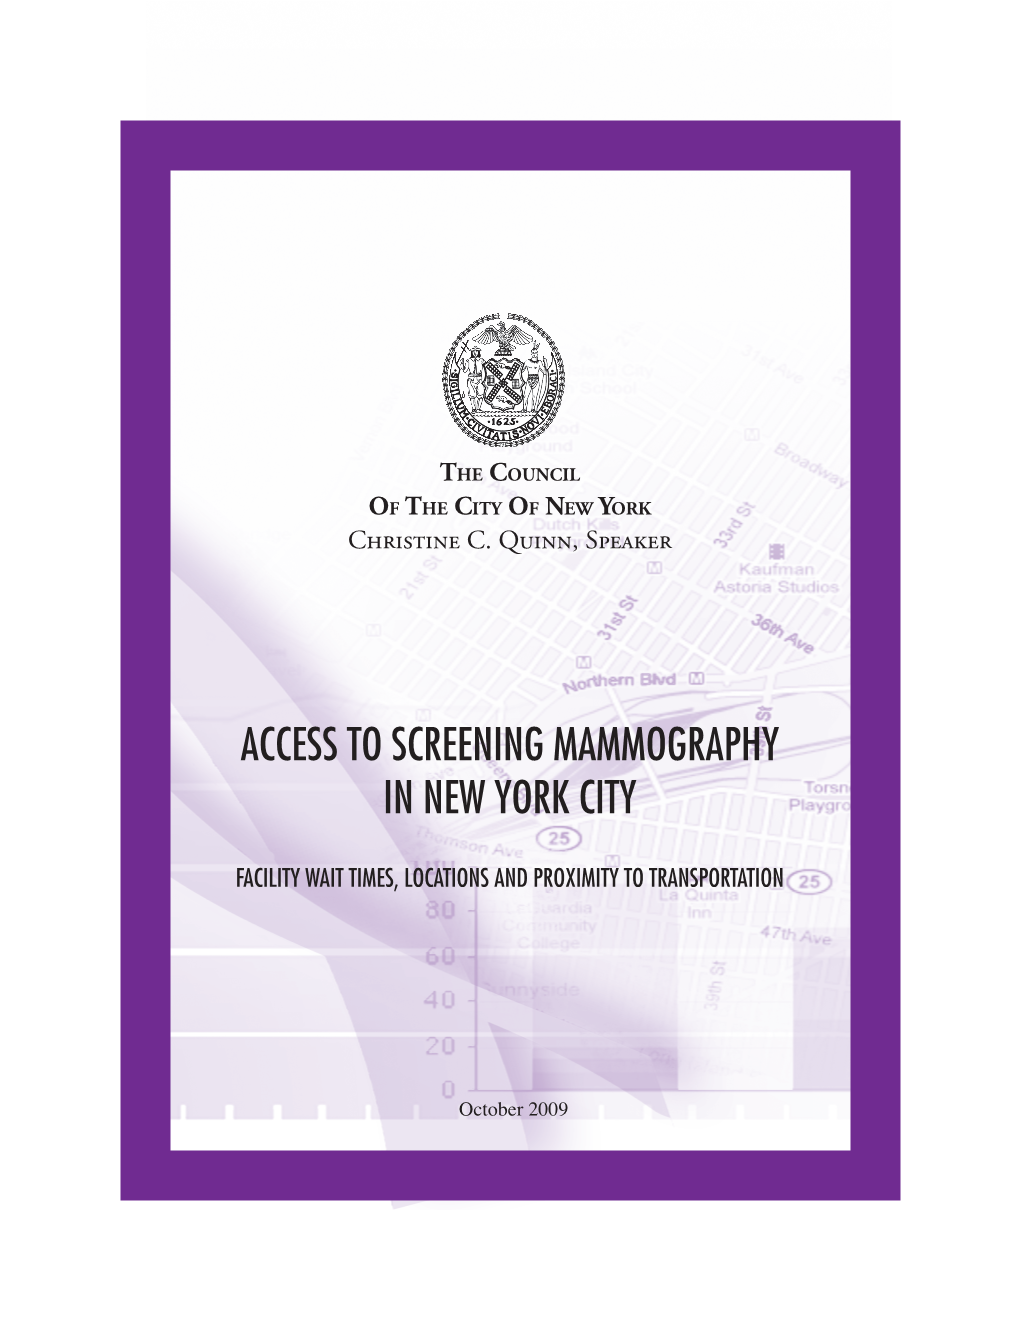 Access to Screening Mammography in New York City